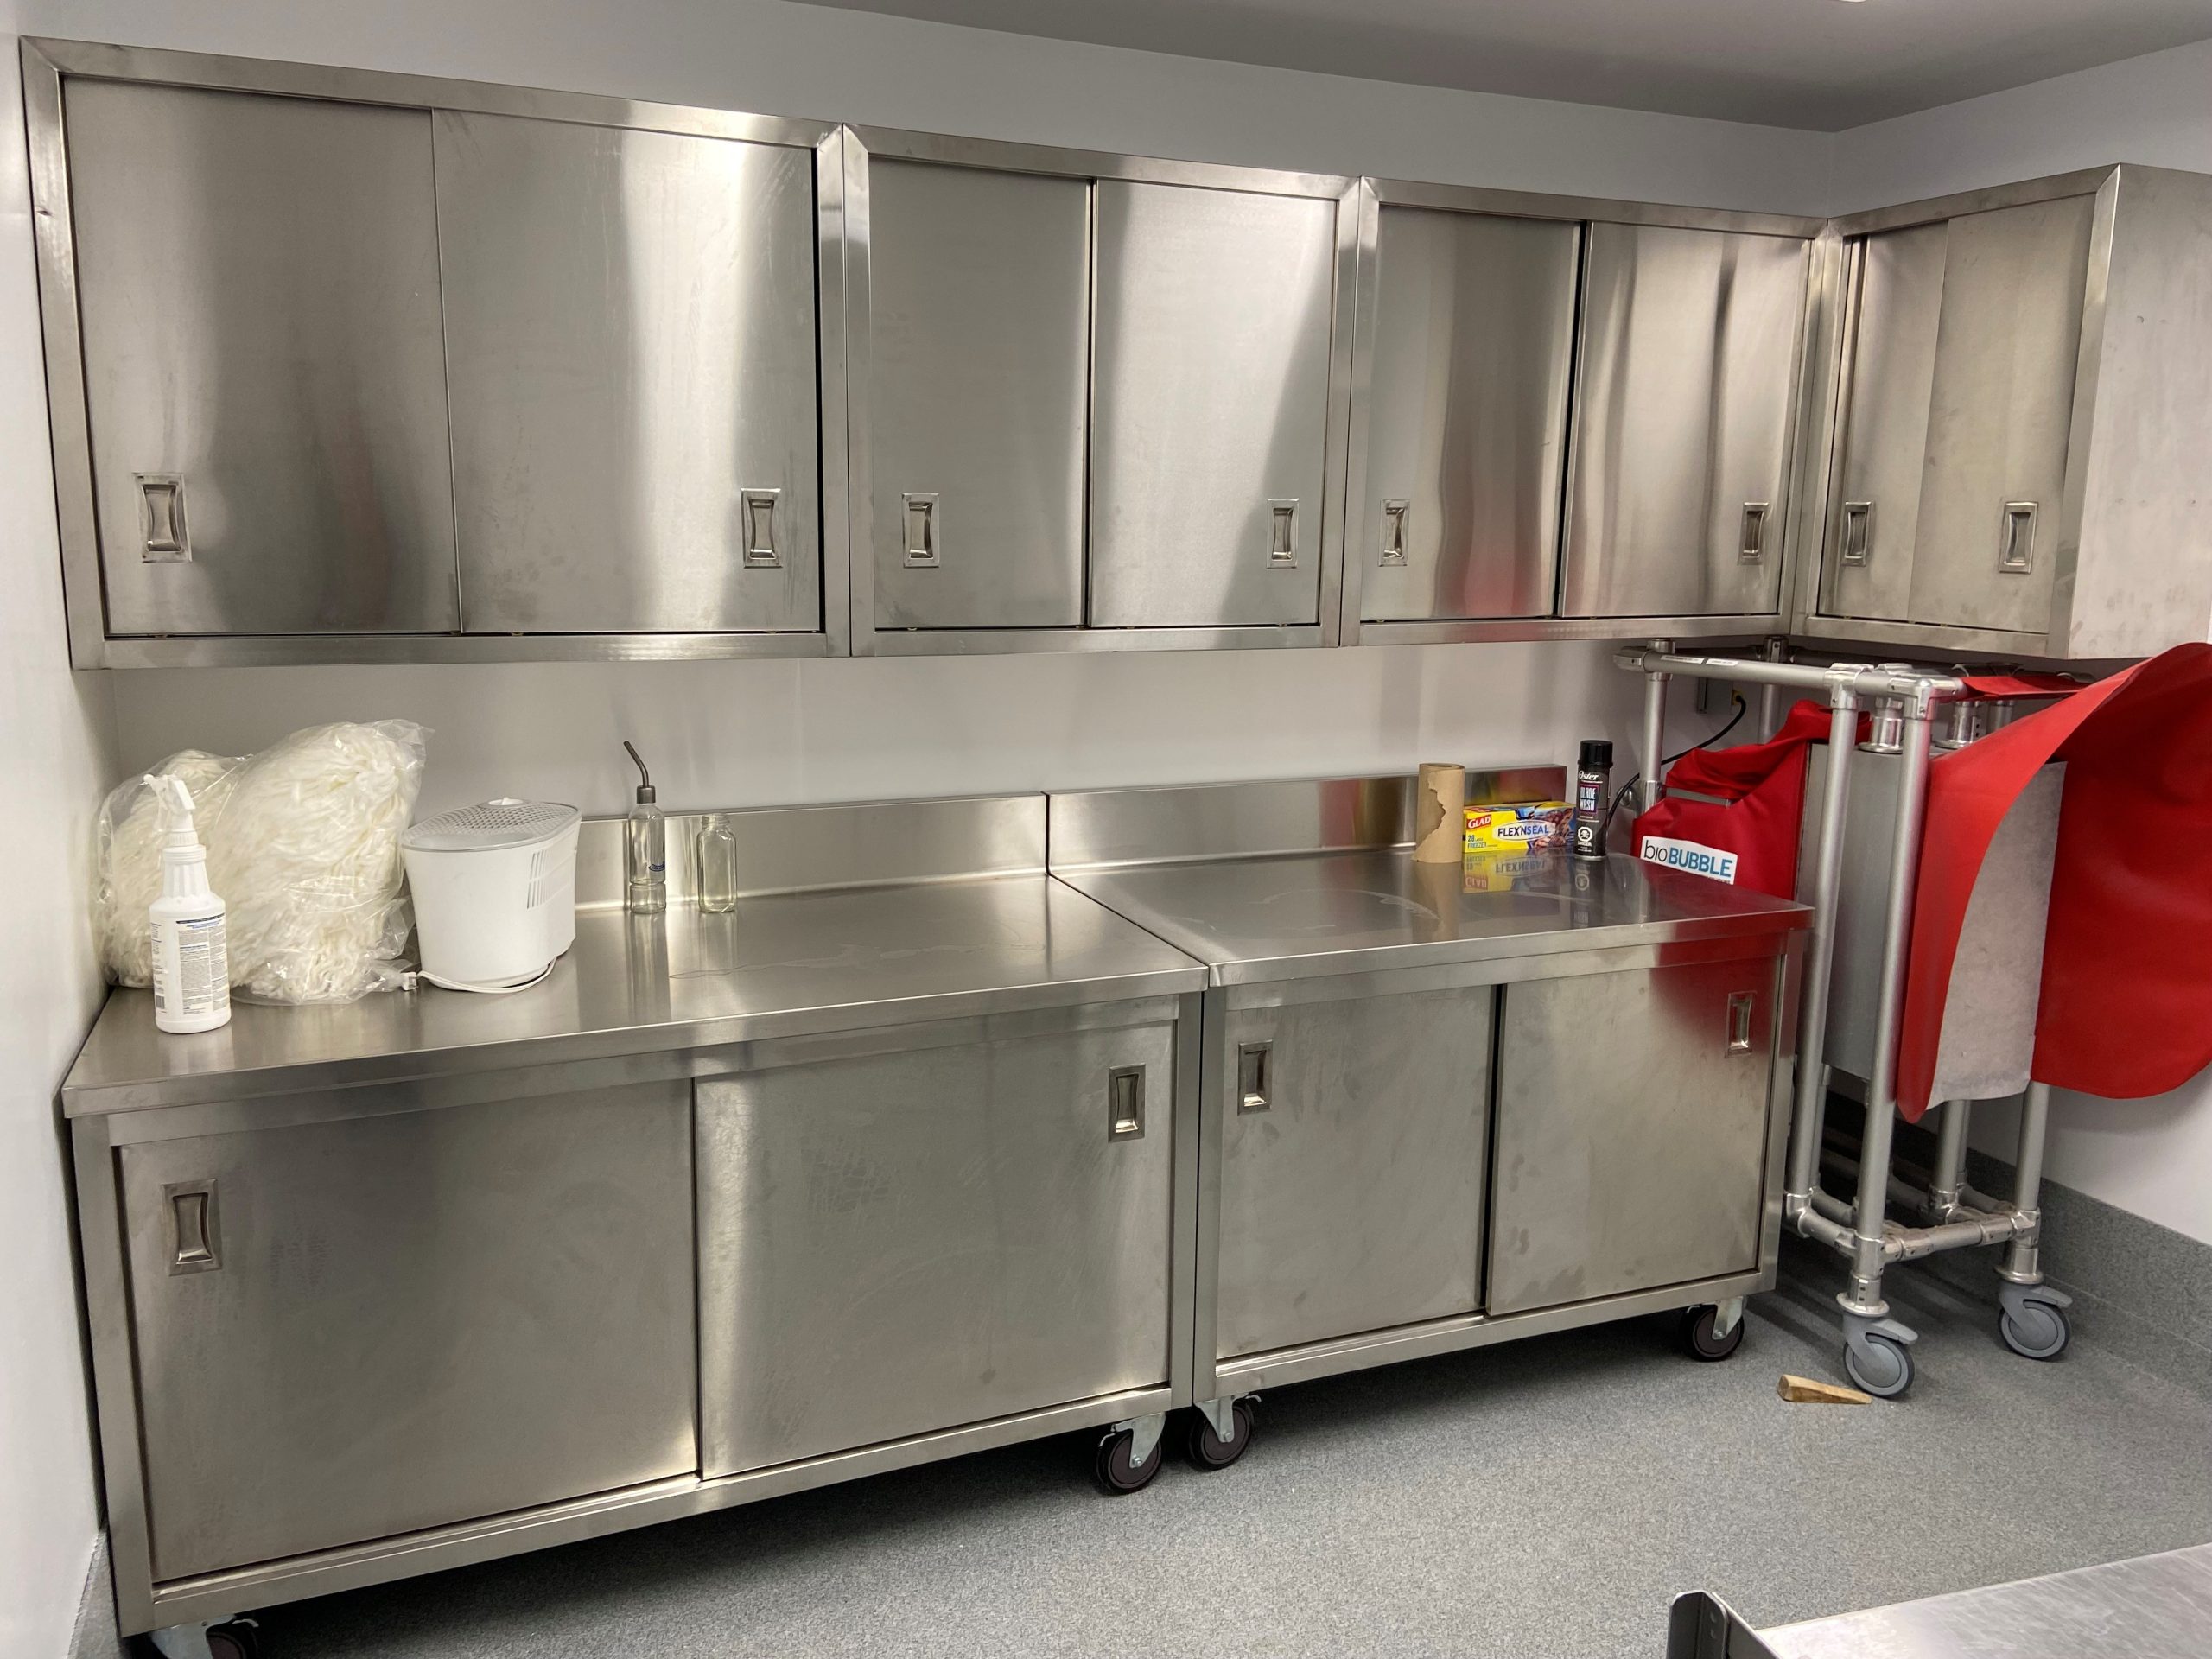 stainless steel cabinets with wall mounted cabinets over top